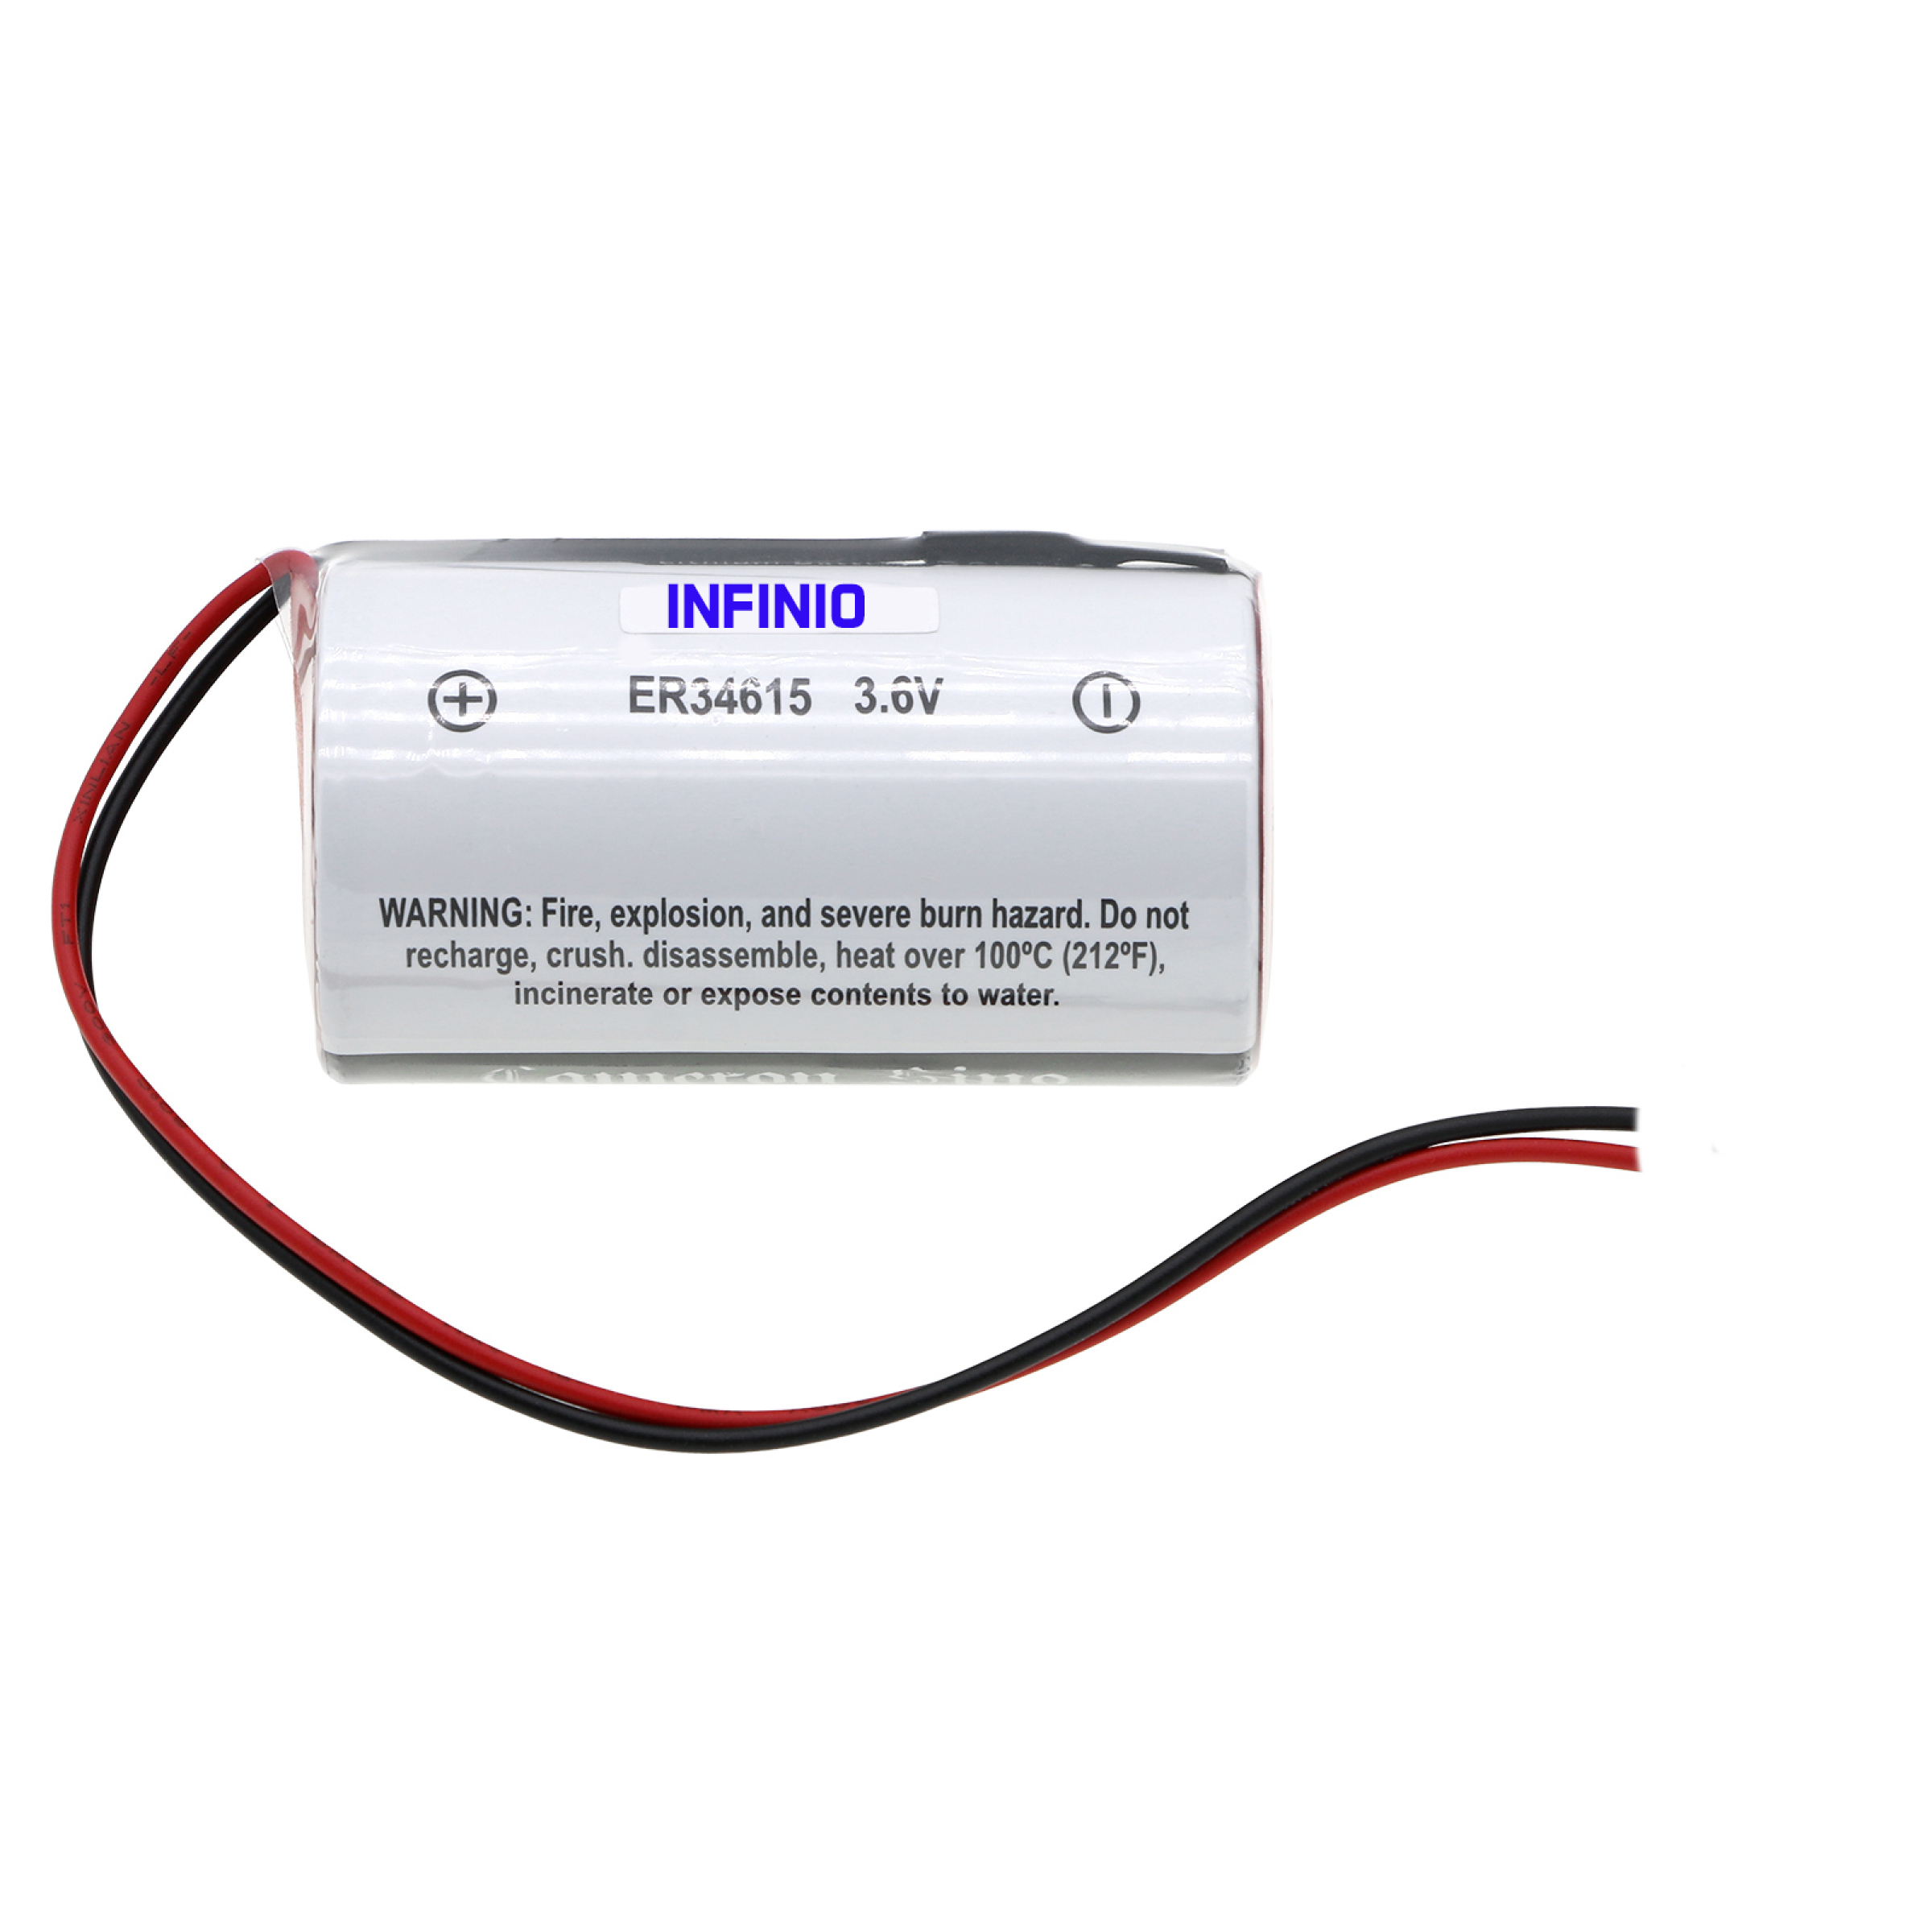 Infinio replacement battery compatible with Jablotron BAT-100A battery for JA-163 no plug